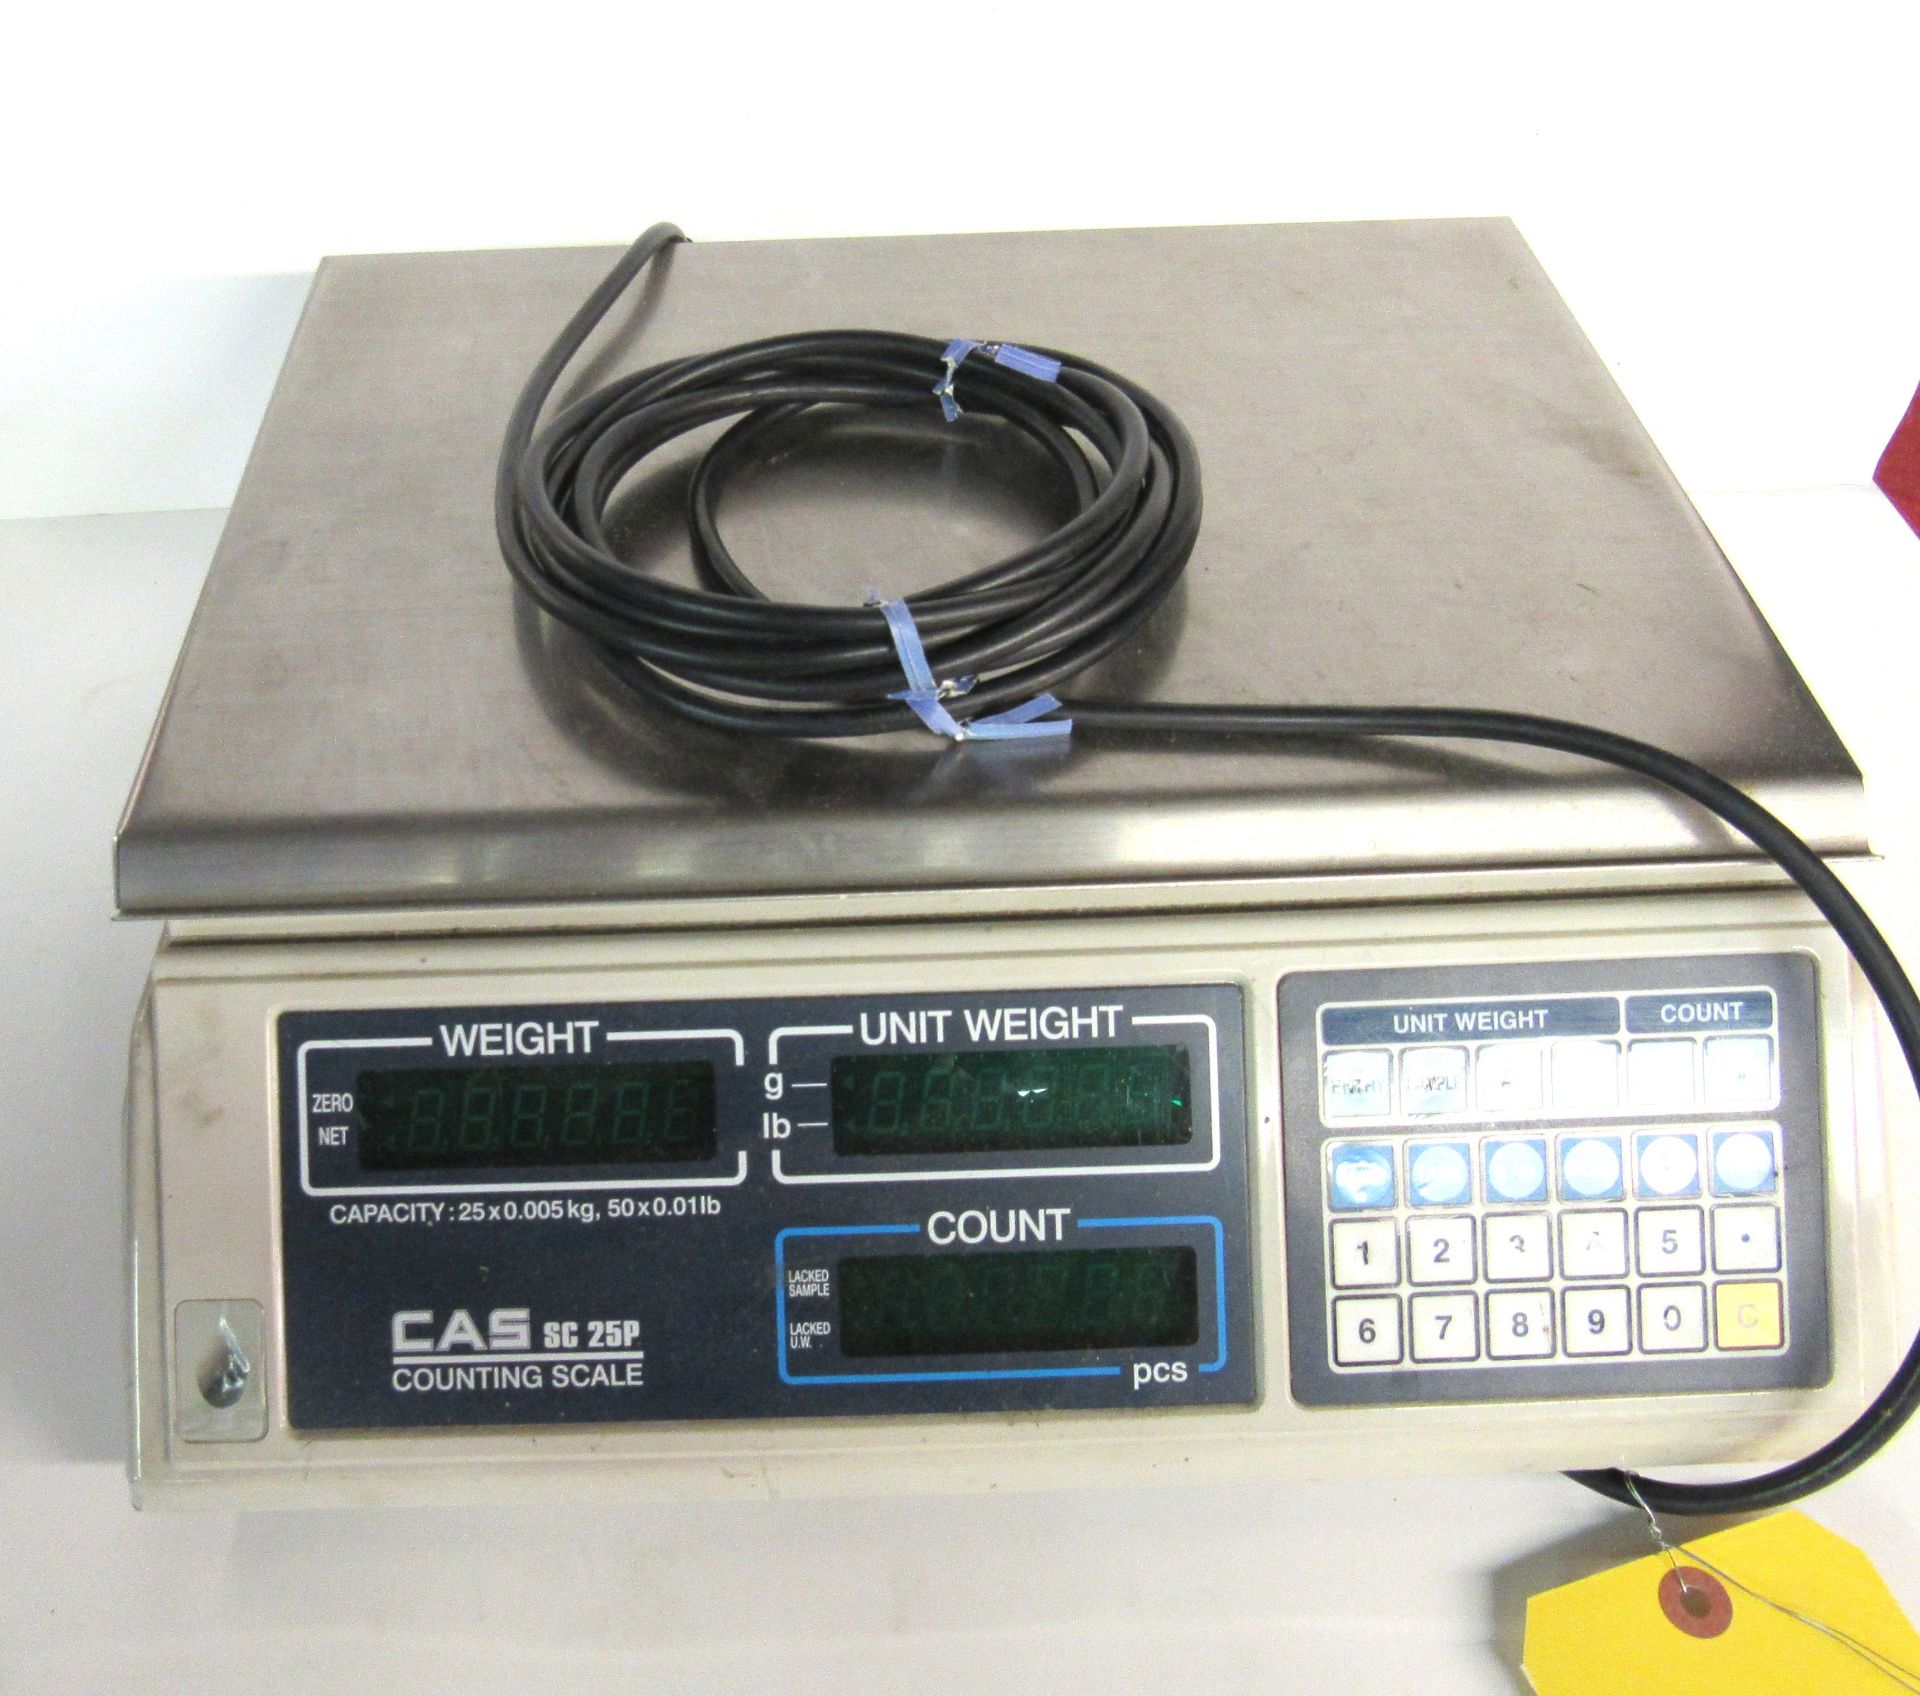 CAS Mod.SC25P Digital Counting Scale